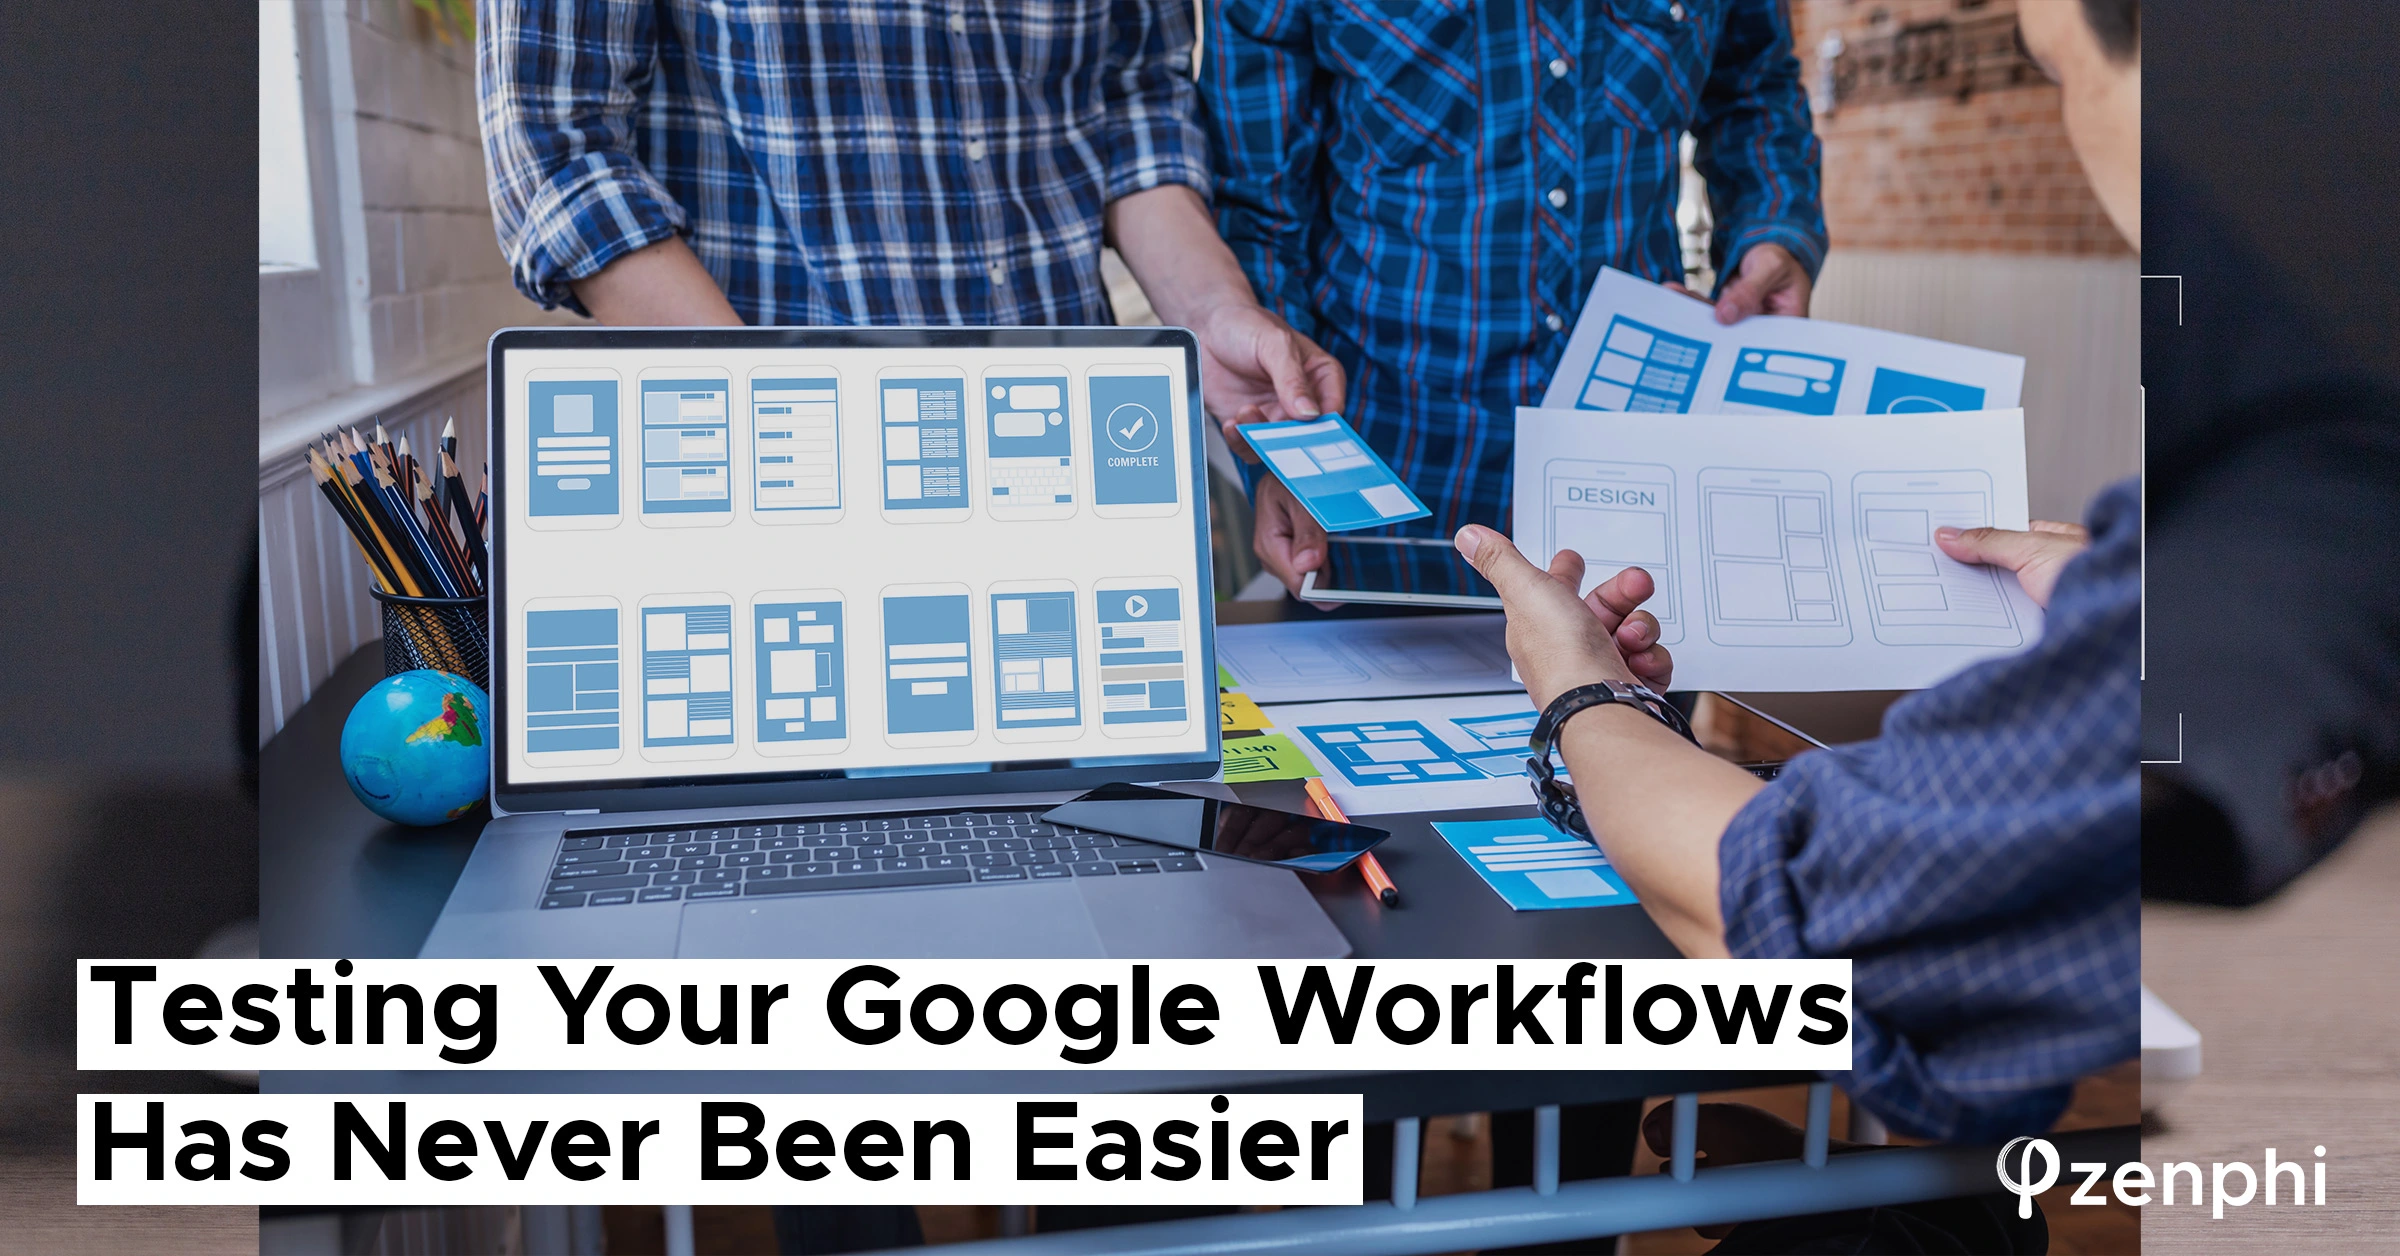 Testing Your Google Workflows Has Never Been Easier